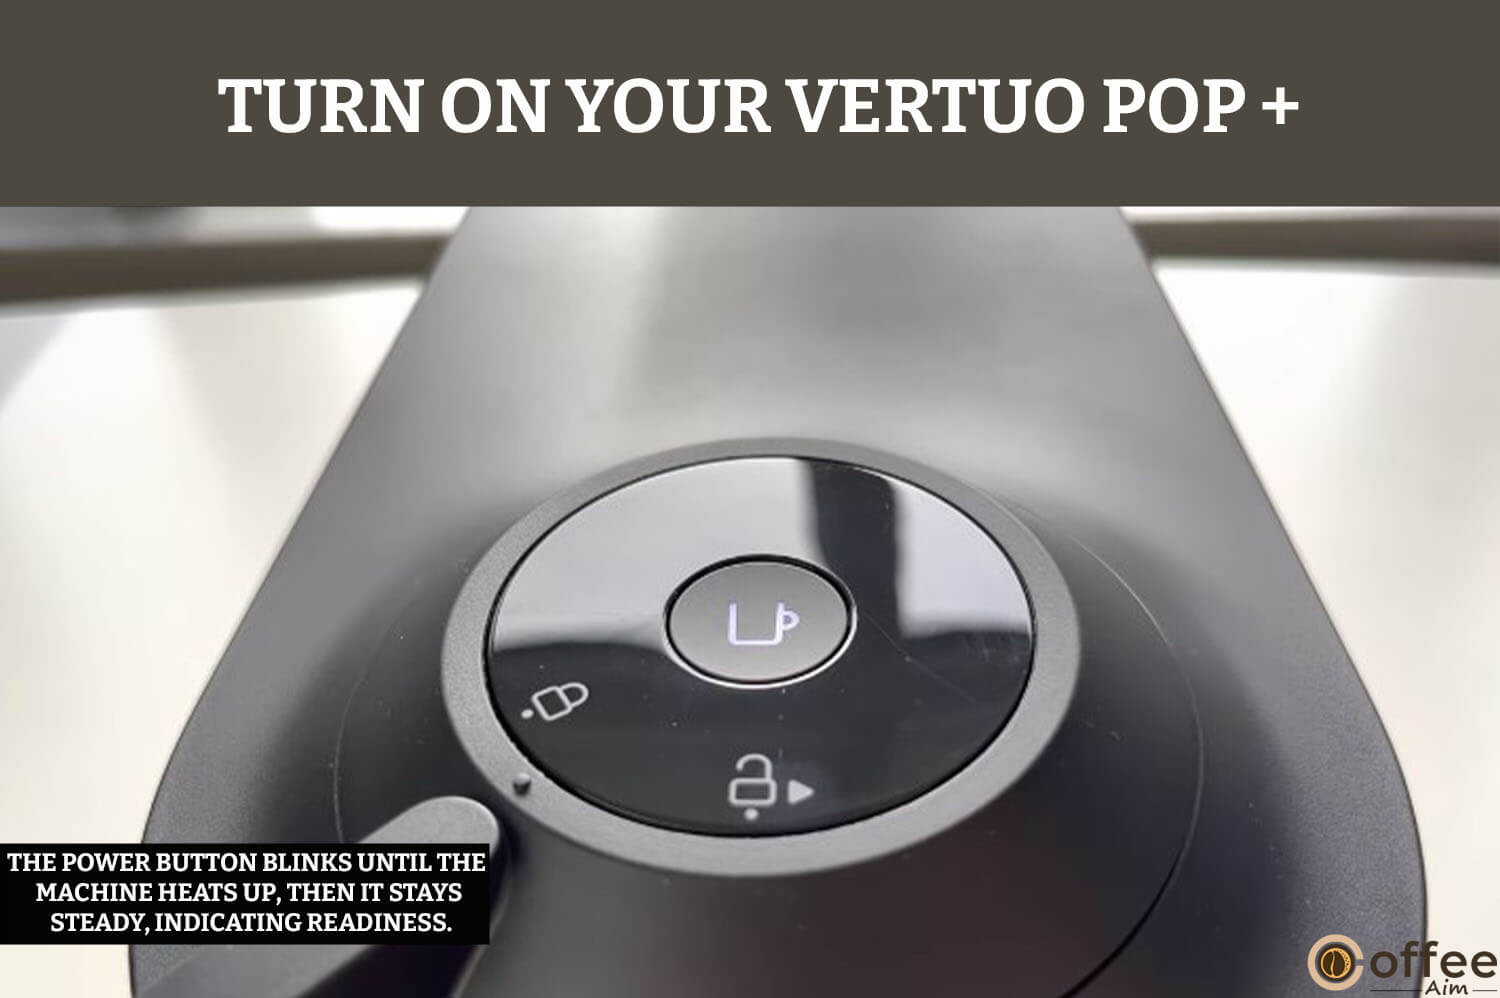 The image illustrates the process of activating your Vertuo Pop+ coffee machine. The power button will initially blink while the machine heats up, and once it reaches the appropriate temperature, the light will remain steady, indicating that your machine is ready for use.